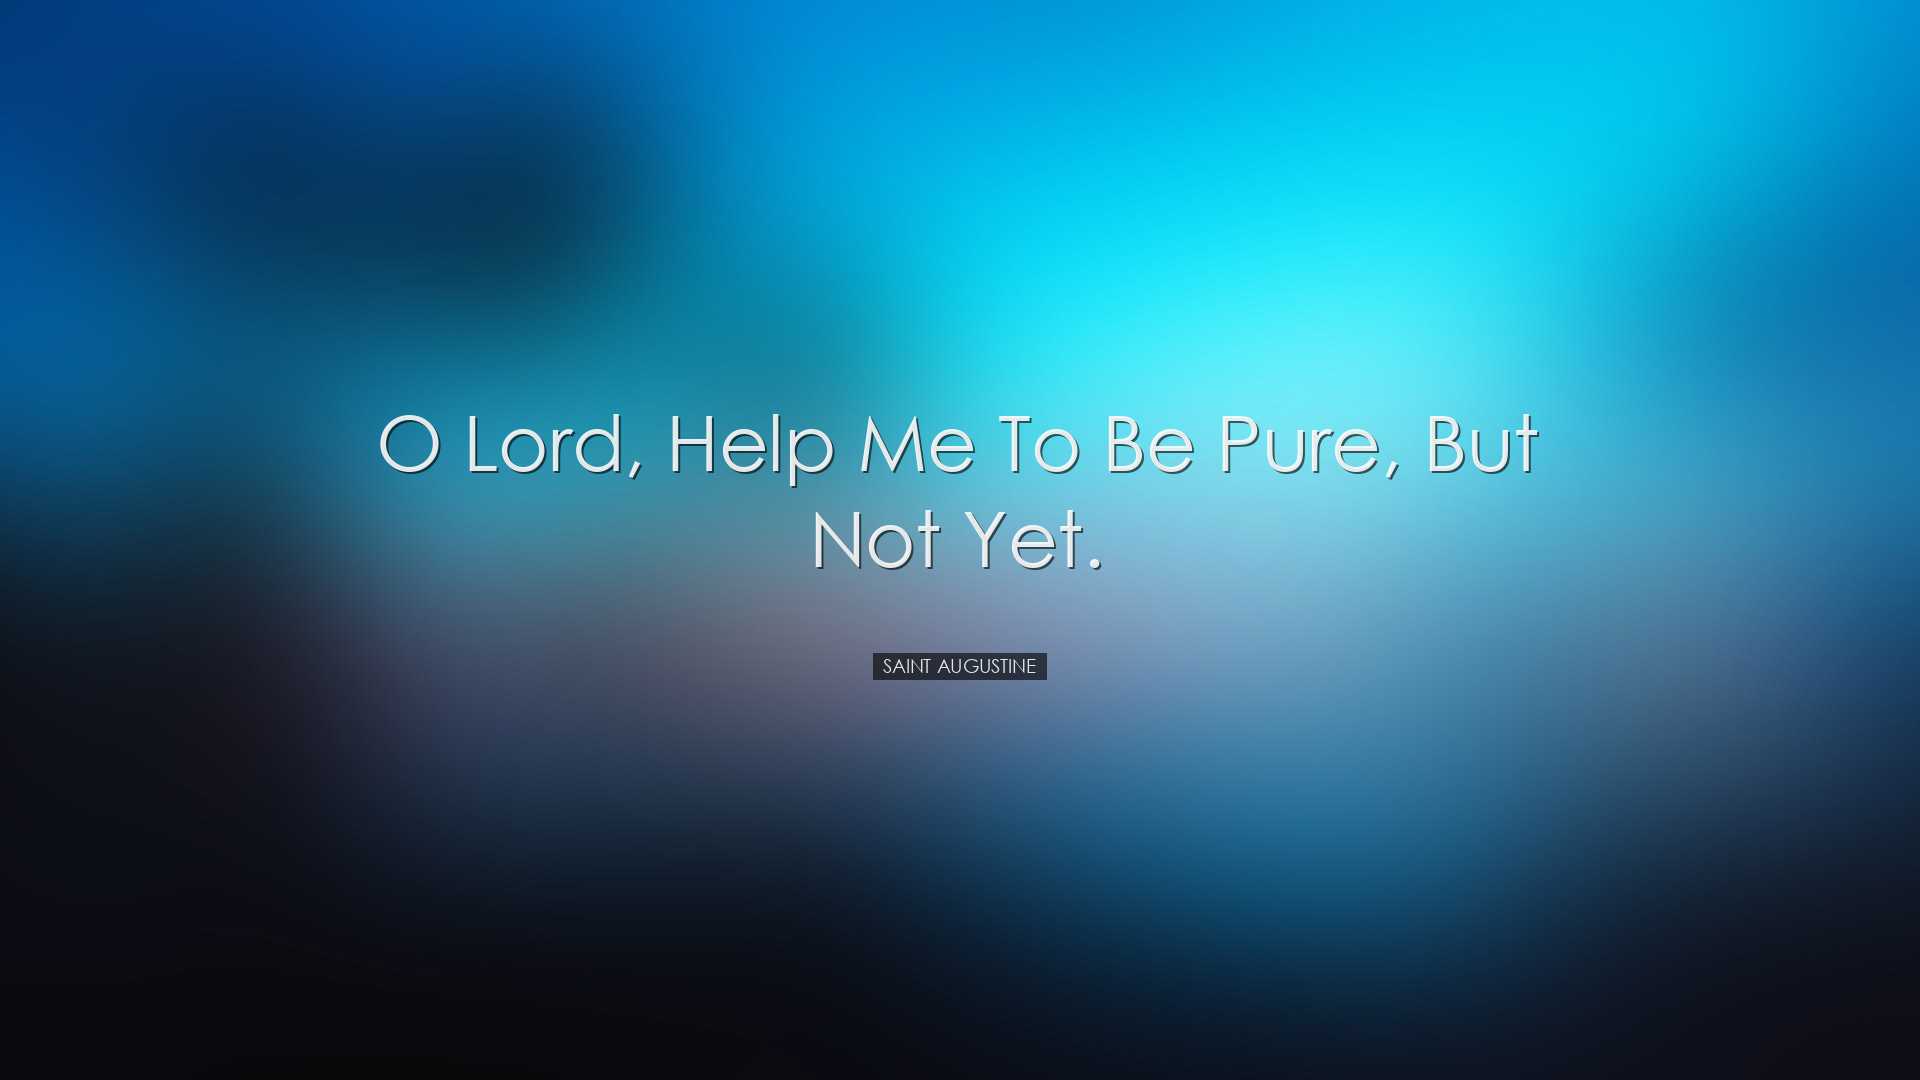 O Lord, help me to be pure, but not yet. - Saint Augustine